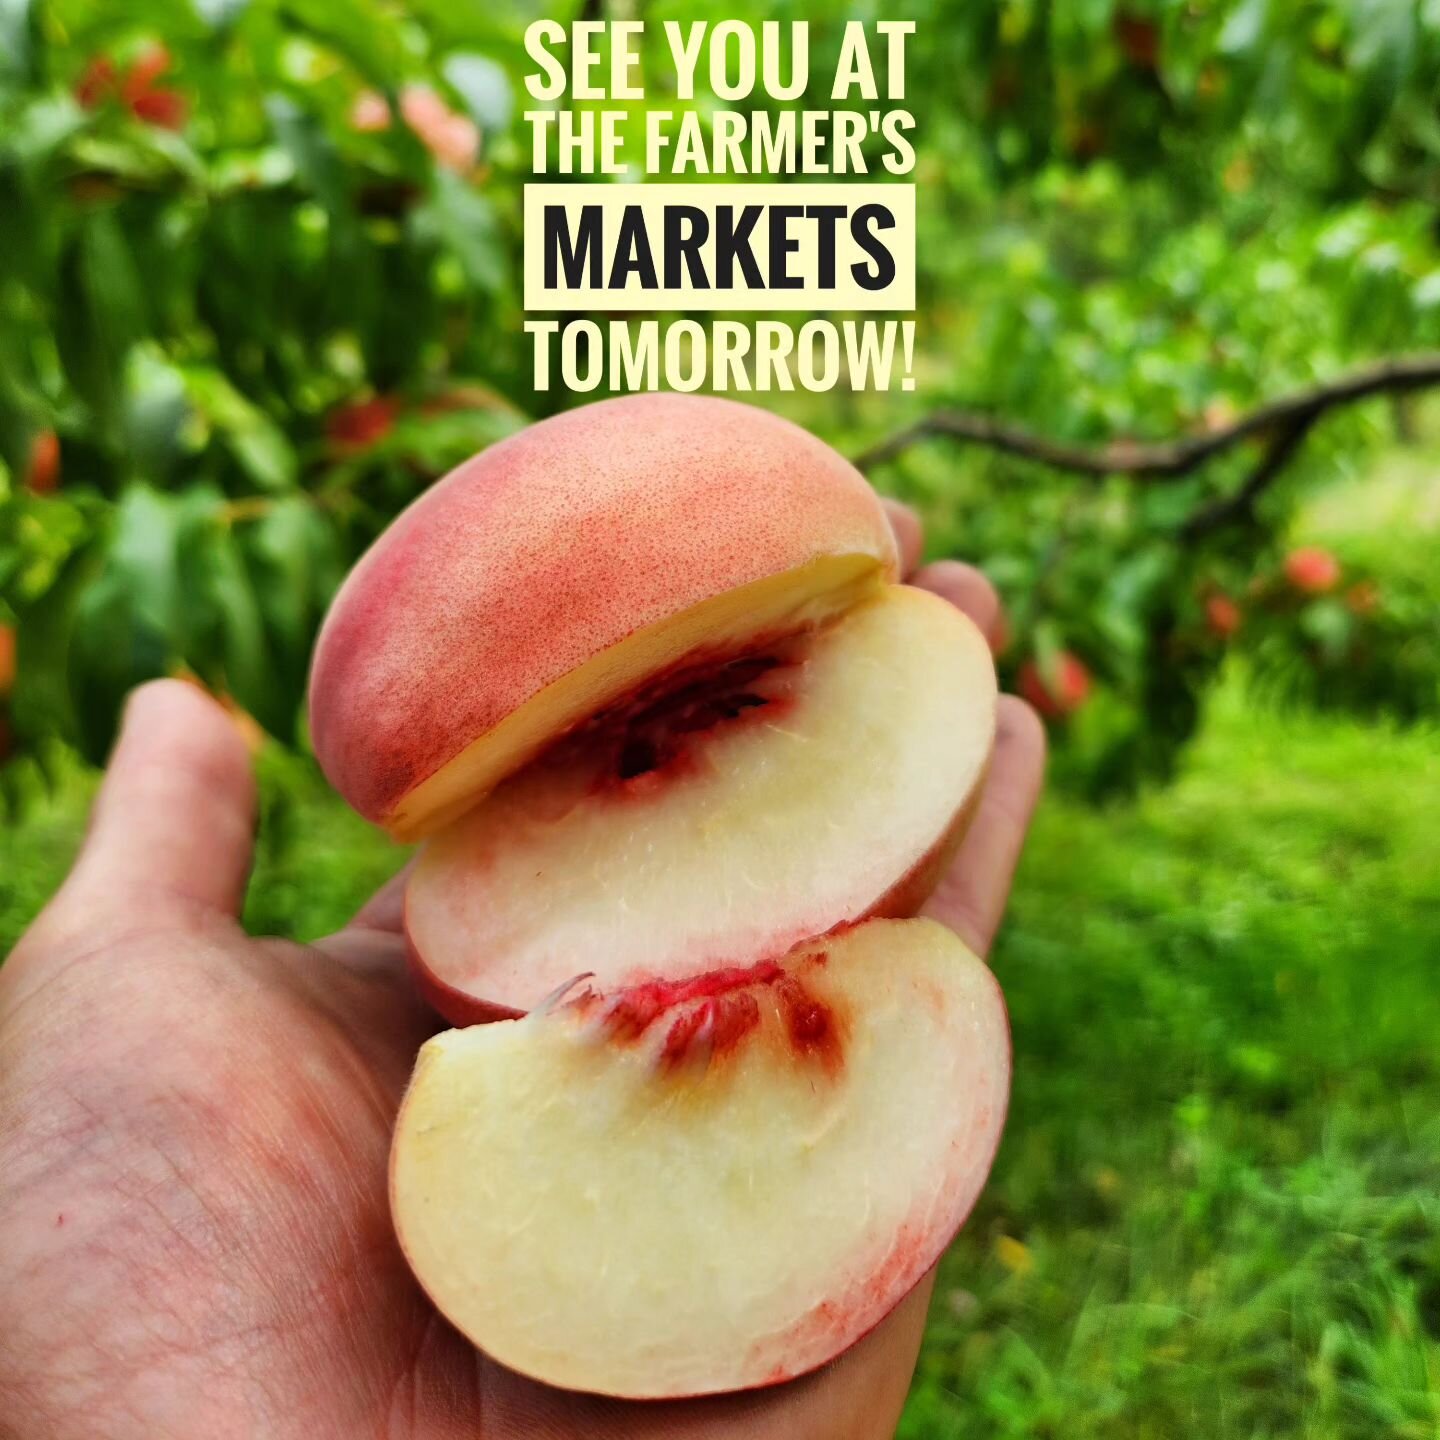 We'll be at Spokane &amp; Kootenai markets this Saturday morning with Suncrest, Red Globe, Roza, &amp; Blushing Star peaches and Red Gold nectarines!